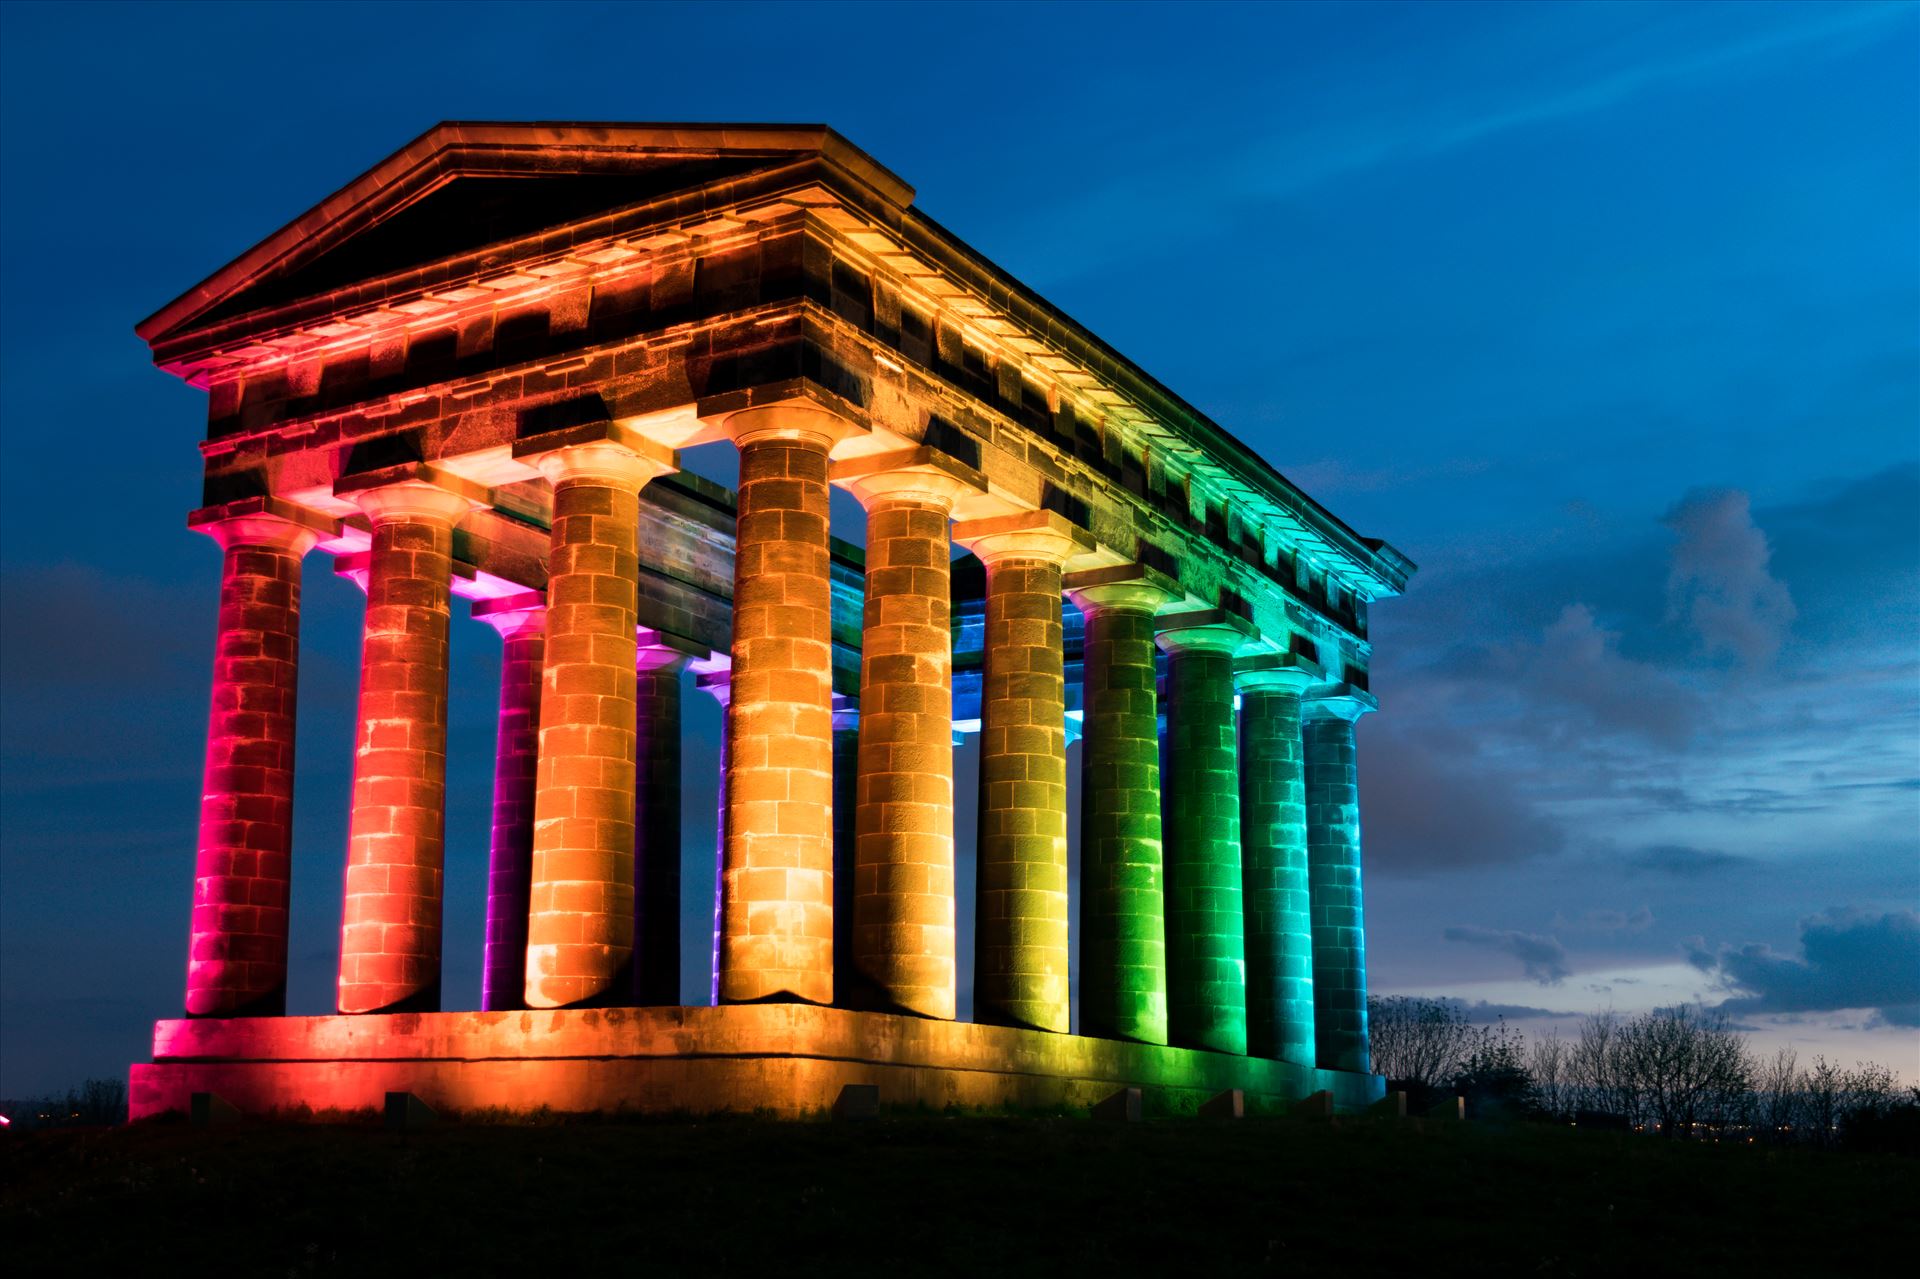 Penshaw Monument Penshaw Monument at night
https://www.clickasnap.com/ca313695-2446-53be-b262-d33236a33e10/photo/01DWAG8P50J1S9X5Y37M3VAQFZ by AJ Stoves Photography